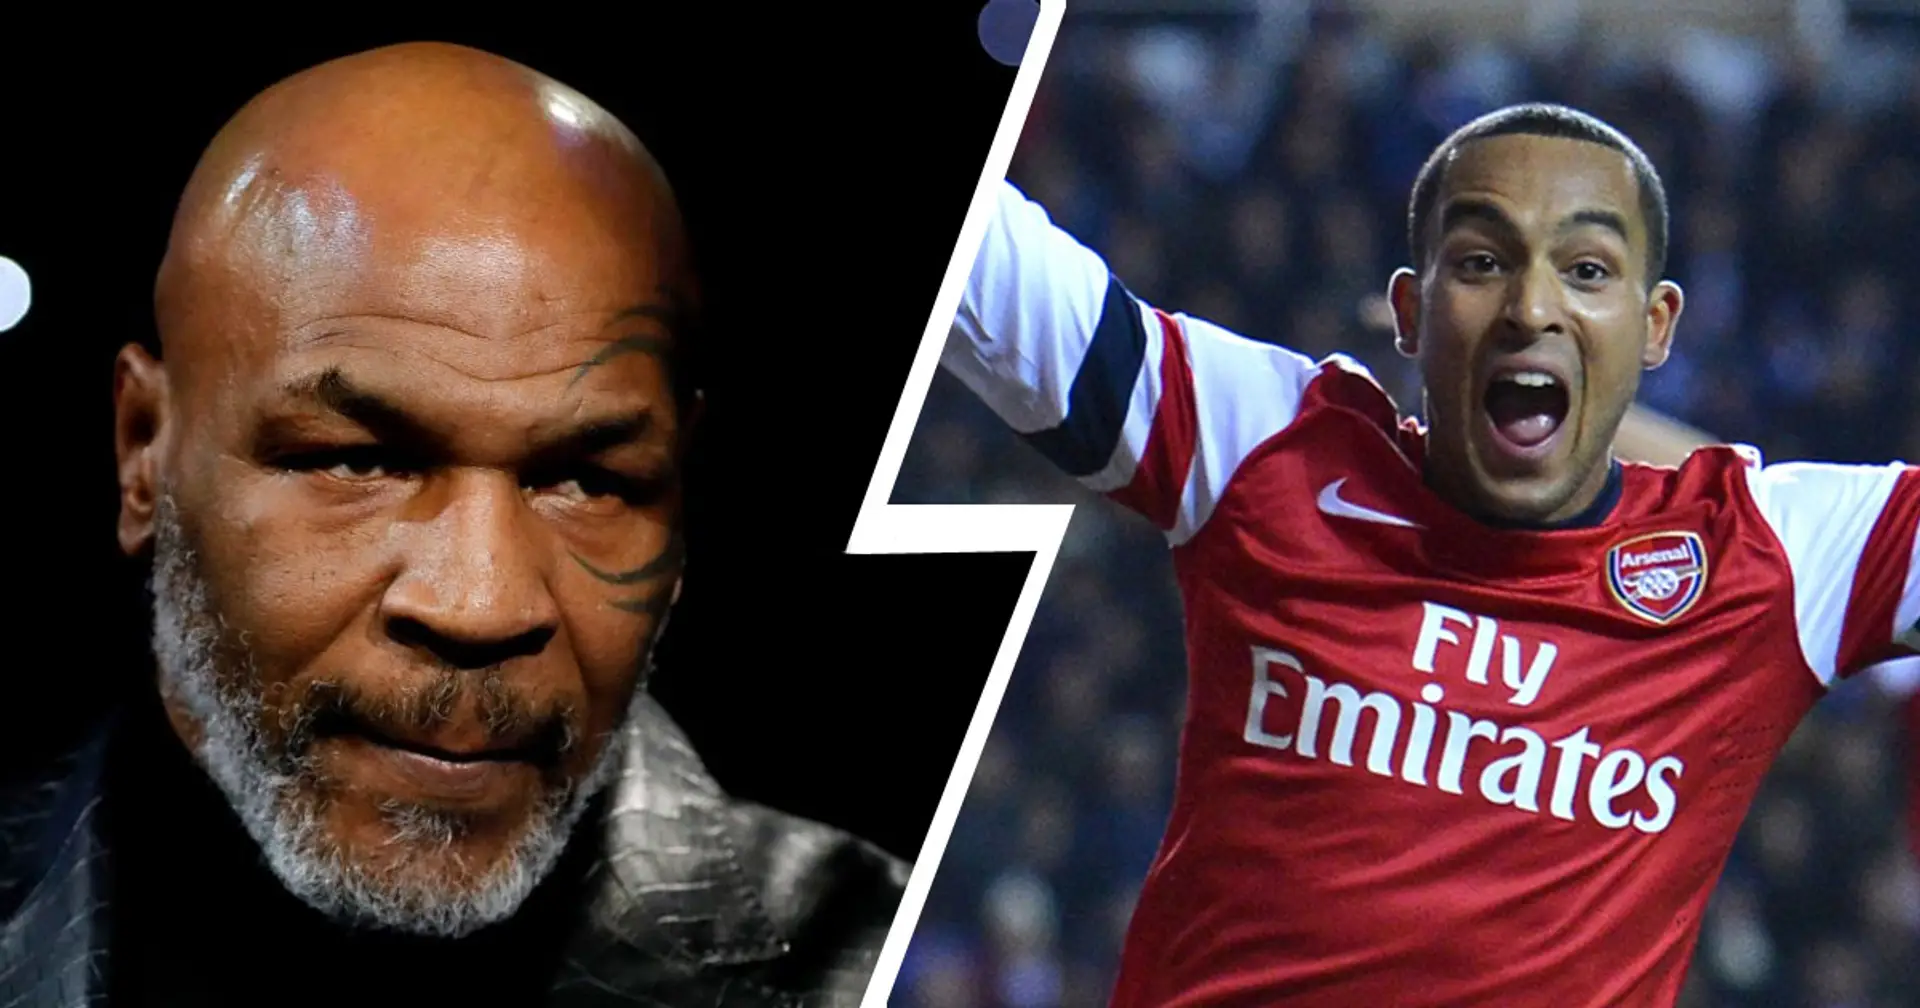 53-year-old Mike Tyson 'officially' comes back: Here are 4 magnificent Arsenal comebacks when it seemed too late